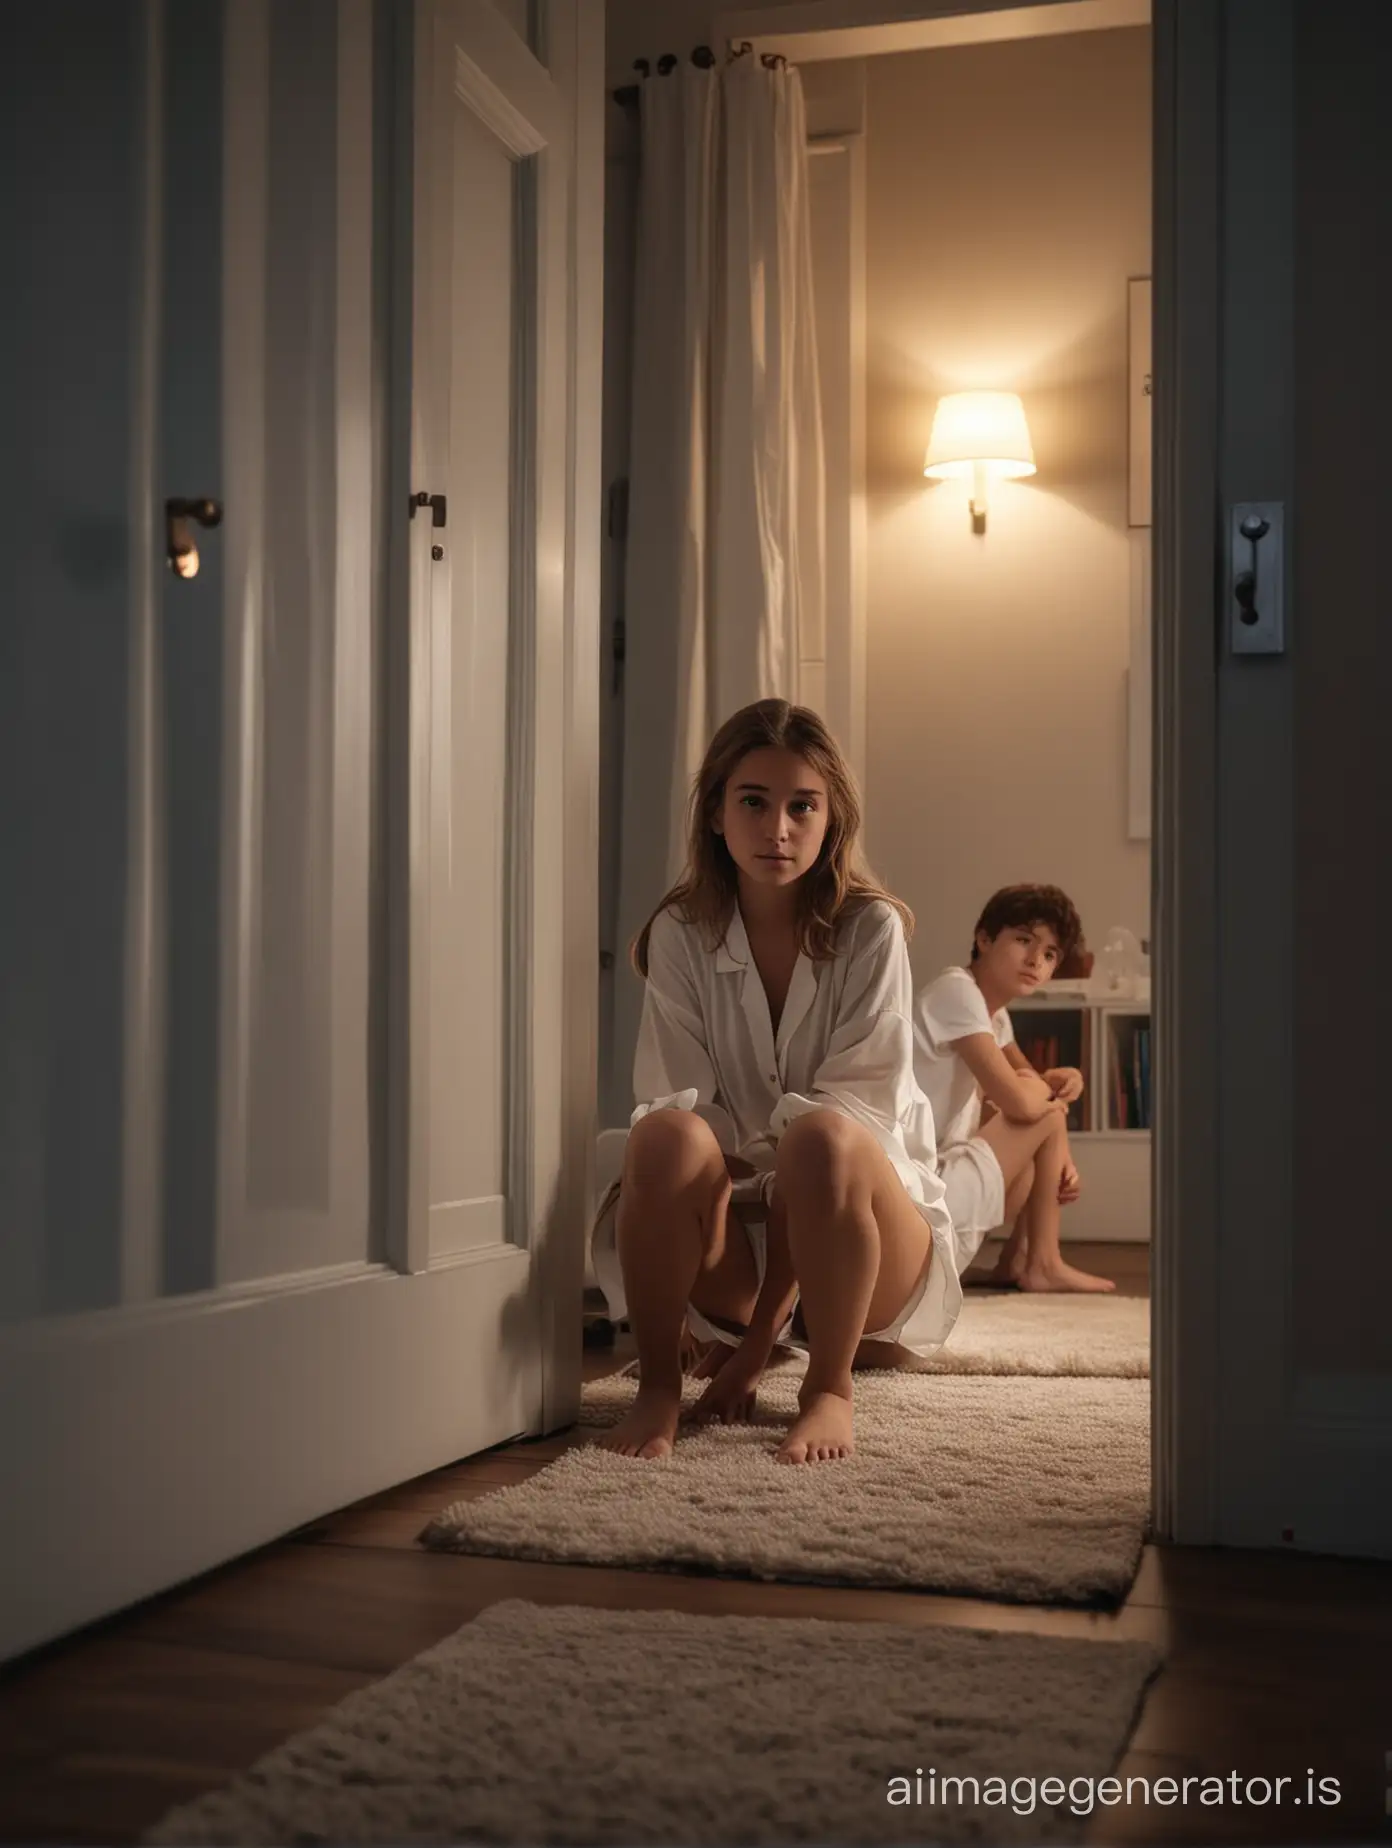 teen girl wearing white silk panties sitting in her room, and the younger boy peeking through the open door under the moonlight. focus on the emotions and interactions between the characters, , dramatic lighting, cinematic composition, 4K